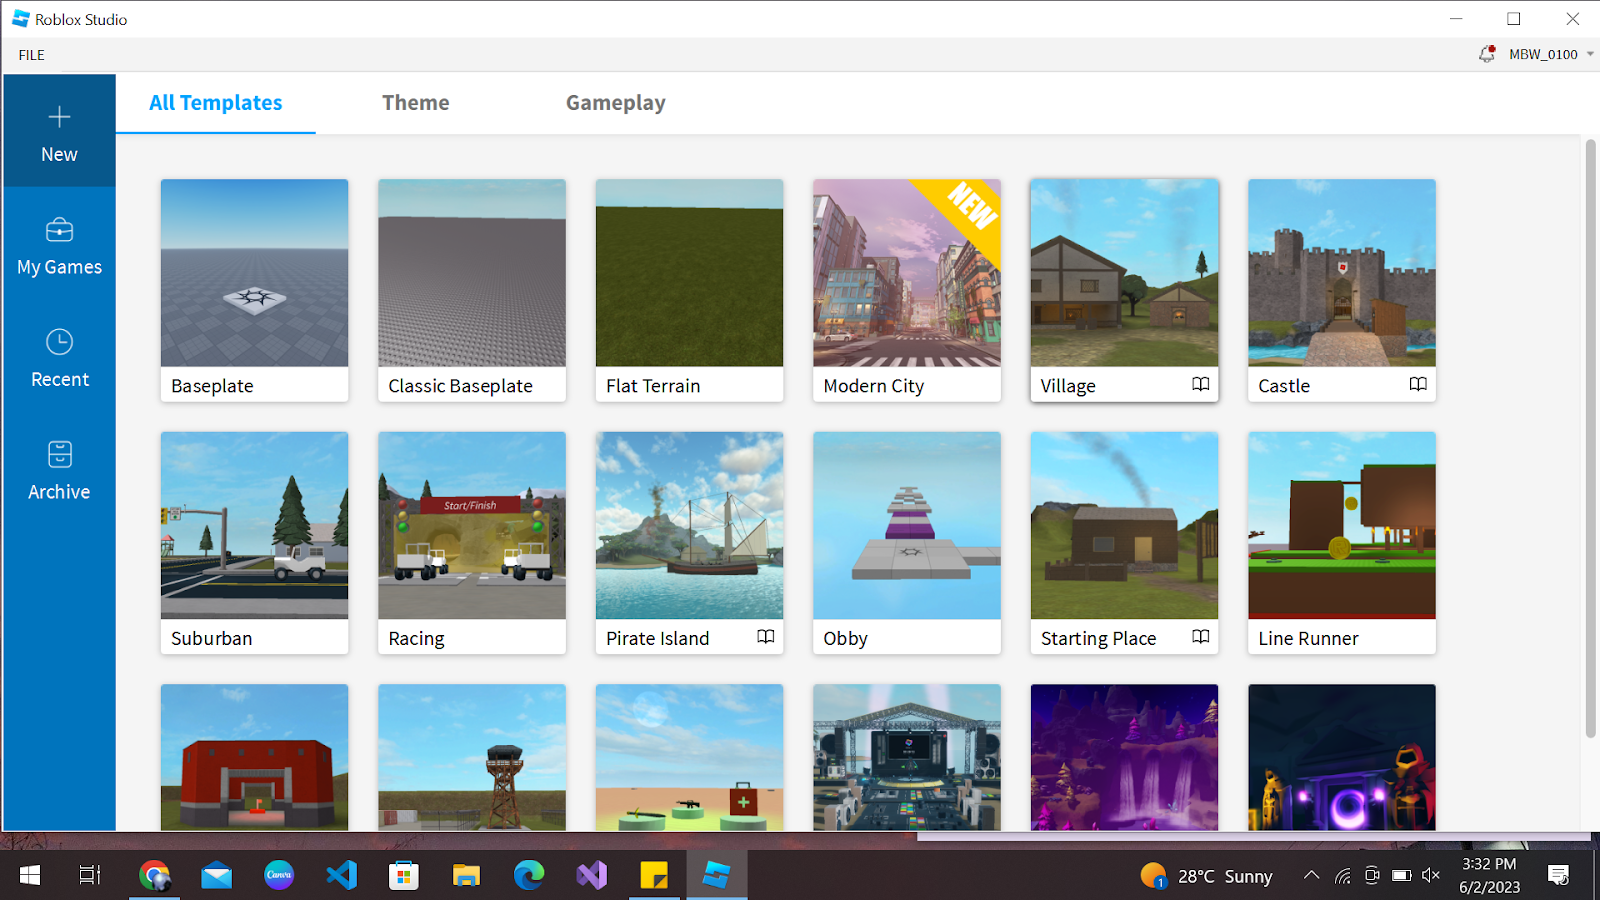 How To Import Custom Avatar In Roblox Studio 2022 Guide  BrightChamps Blog